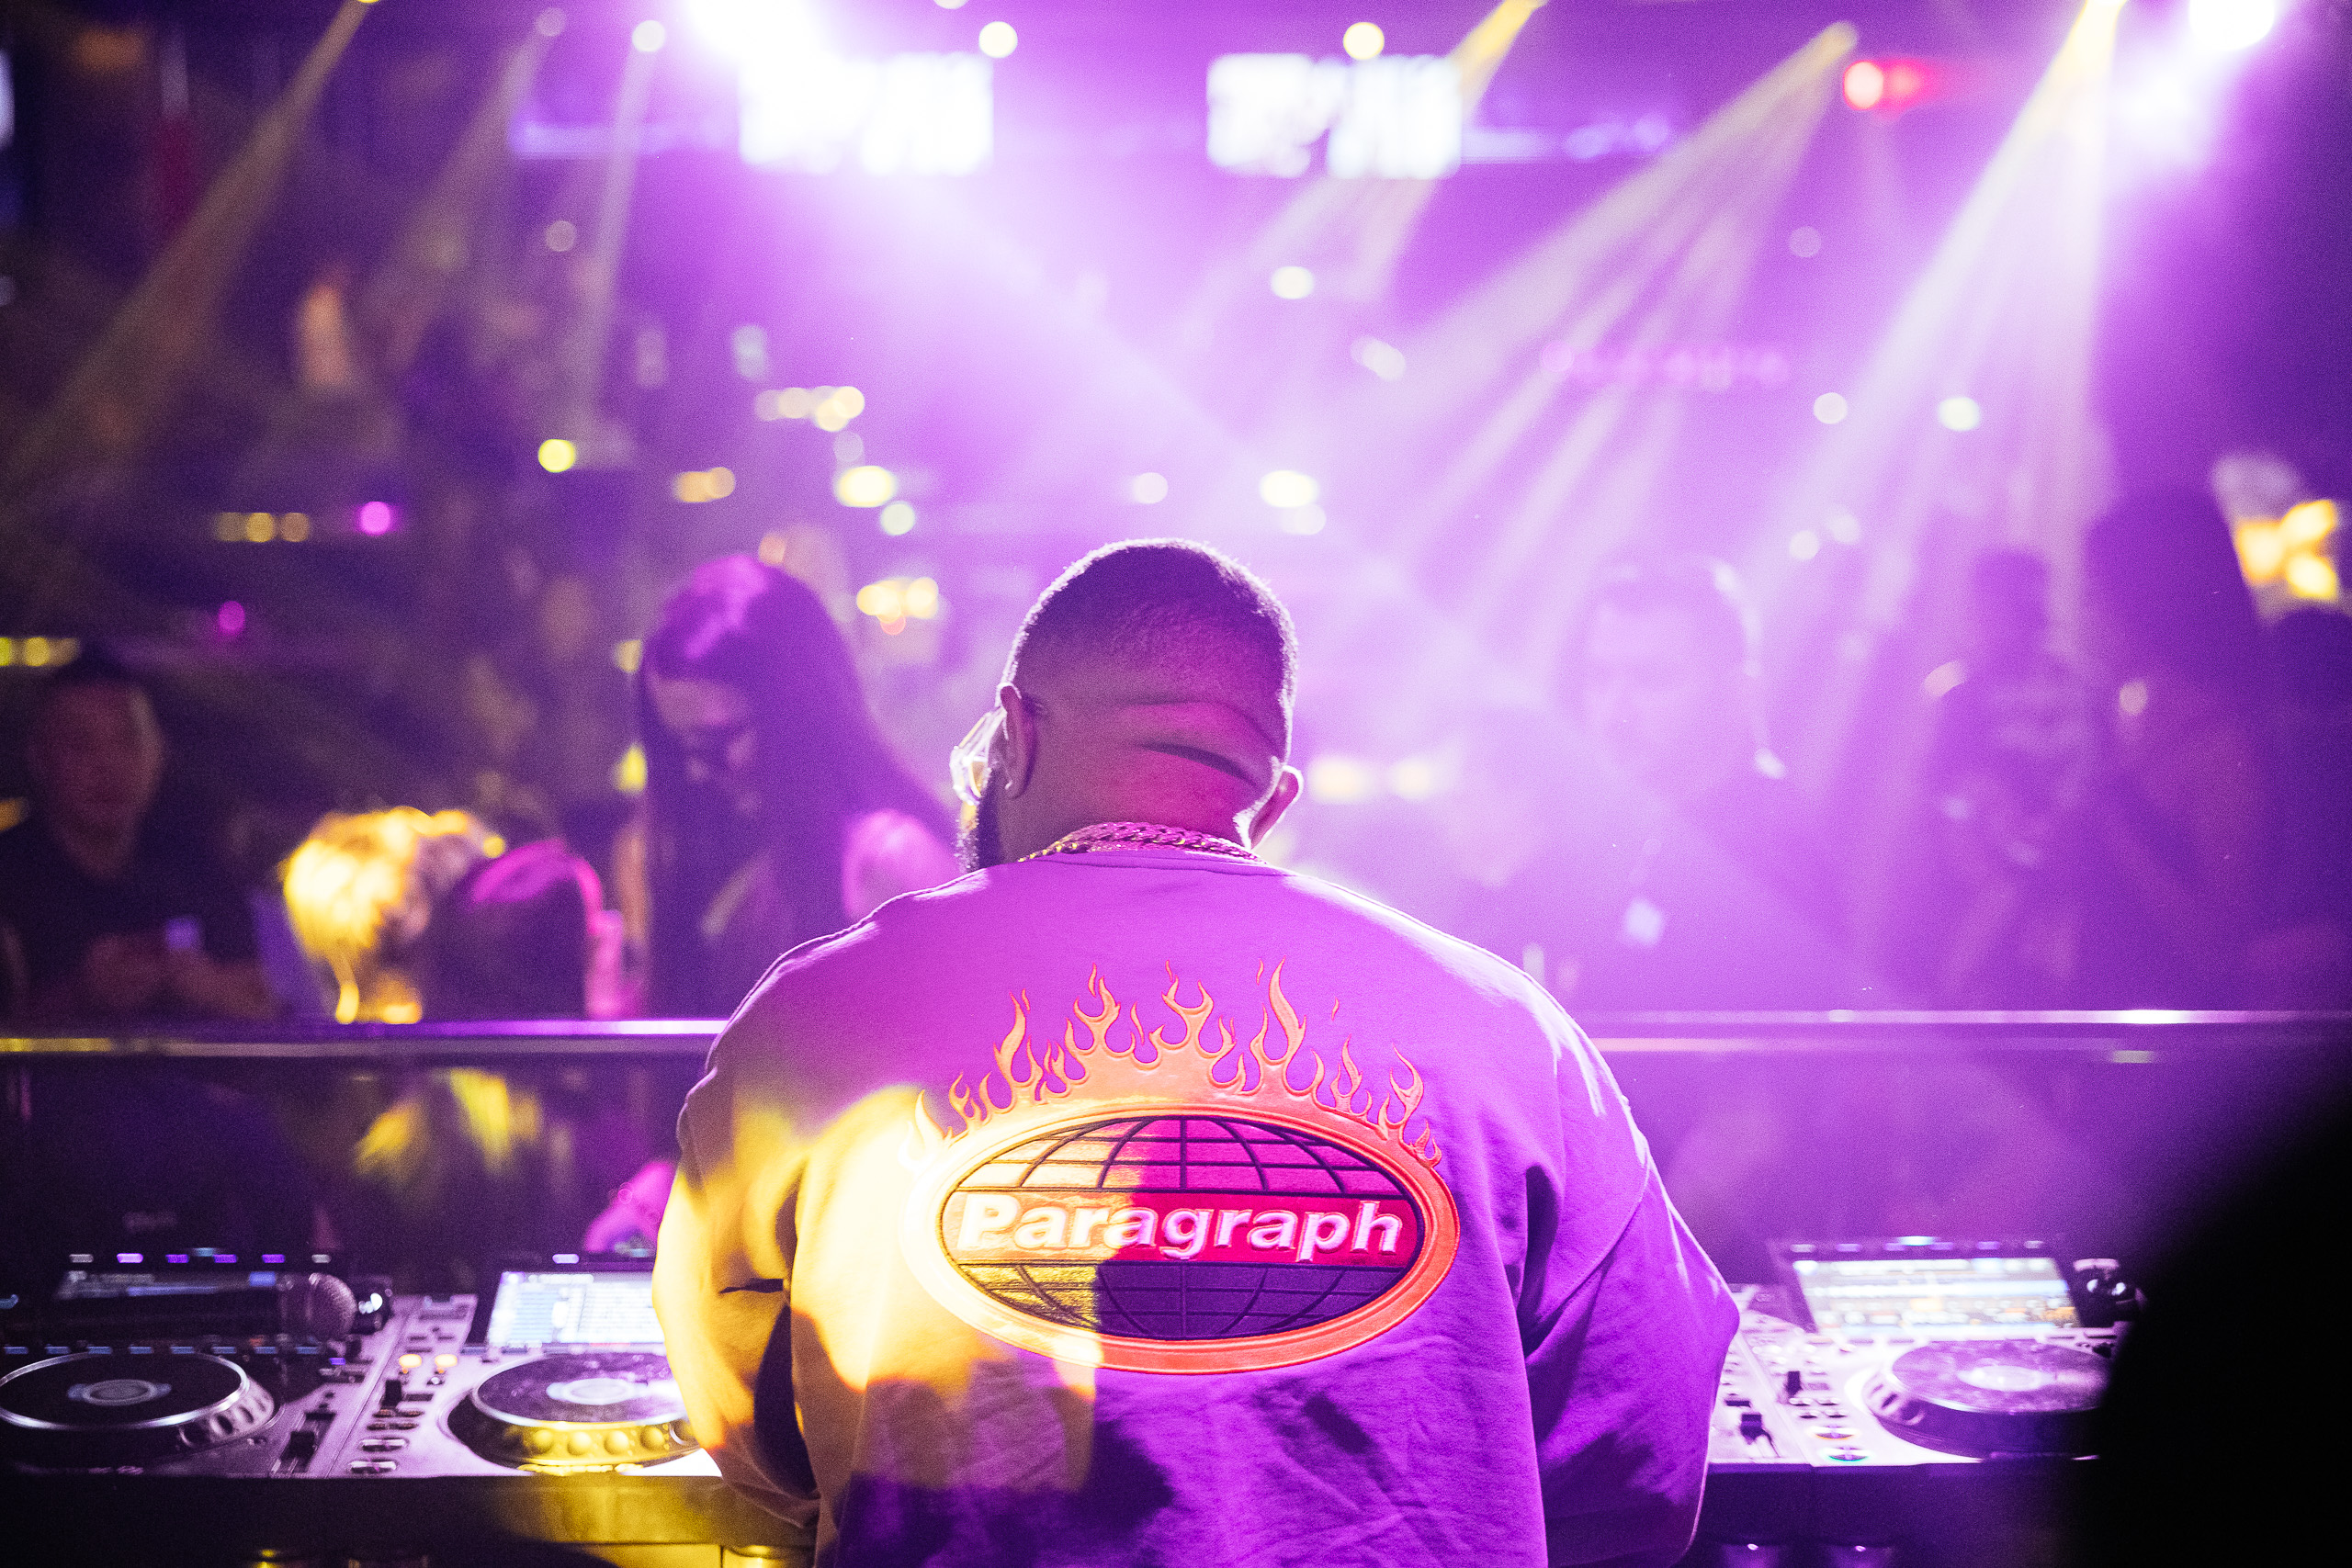 Dj Carnage at the Kappa party for Gumball 3000